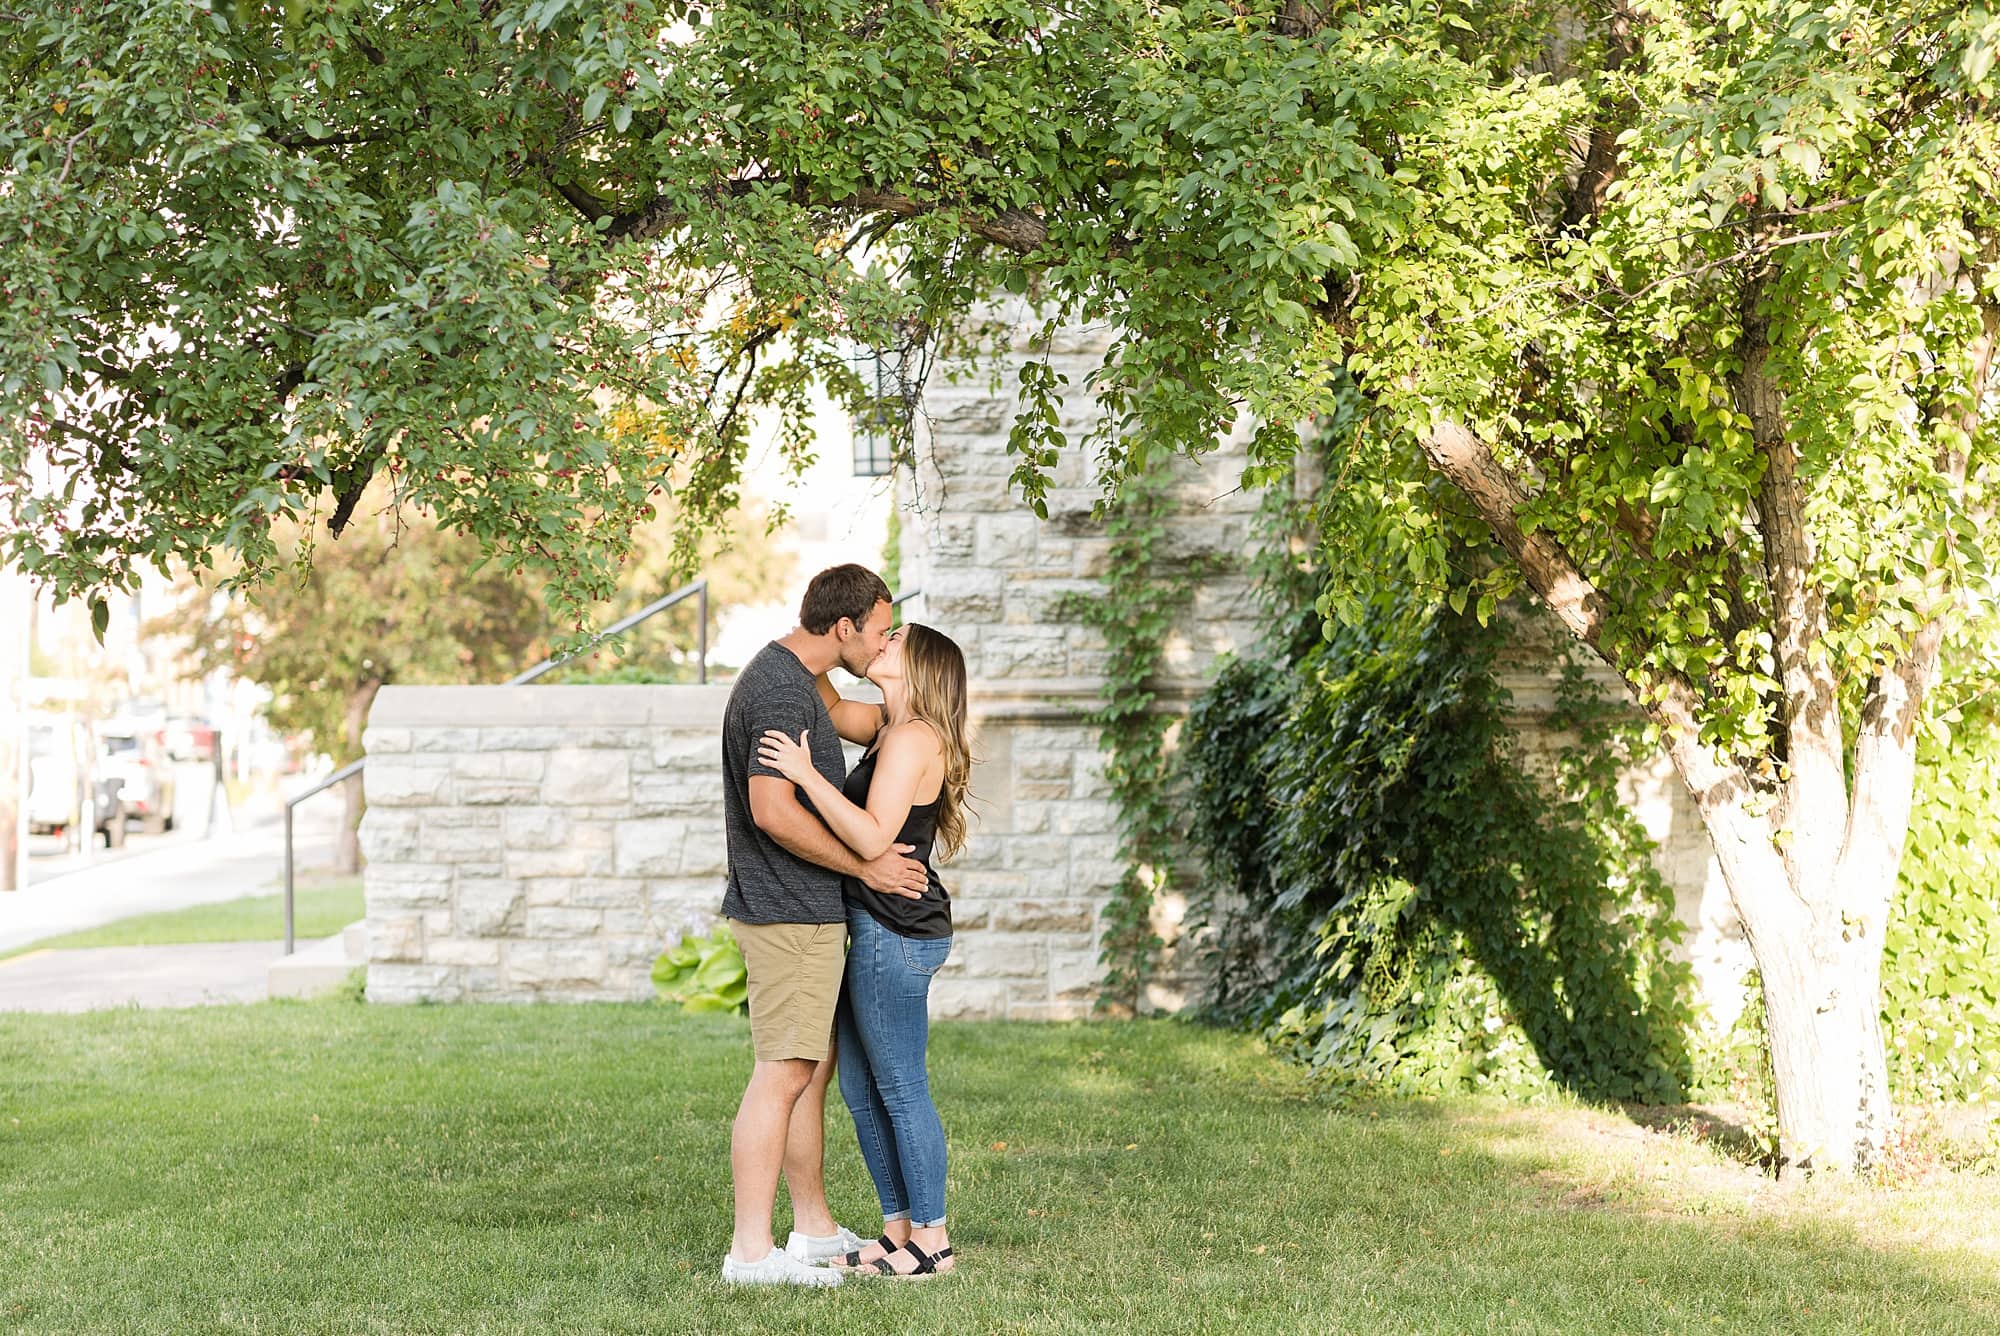 An engaged couple kissing under a tree during their engagement session in Downtown Fargo